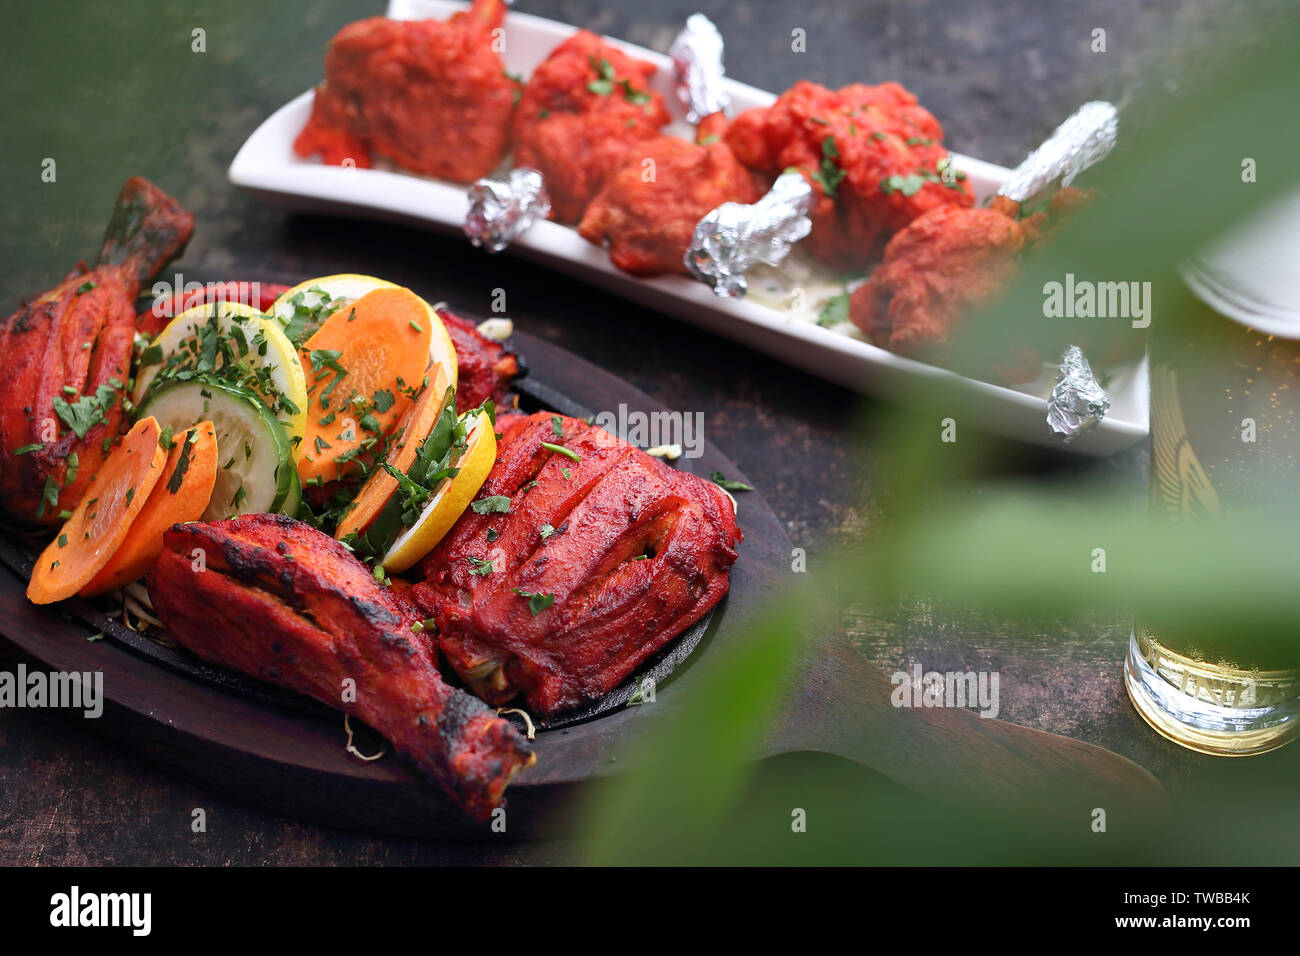 Indian cuisine, aromatic curry dishes. Colorful dishes. Stock Photo